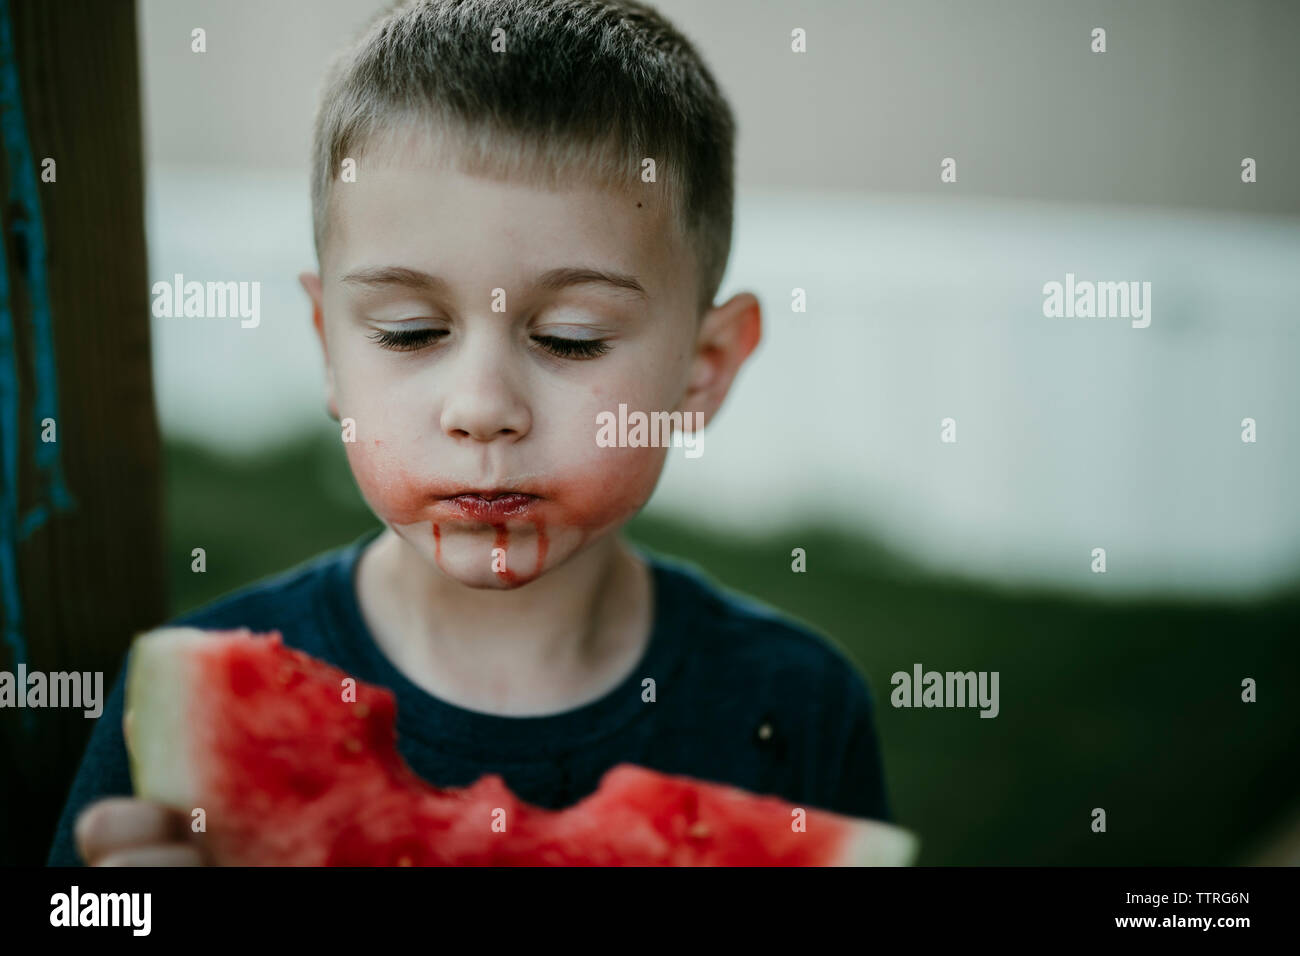 Boy with eyes closed eating watermelon Stock Photo